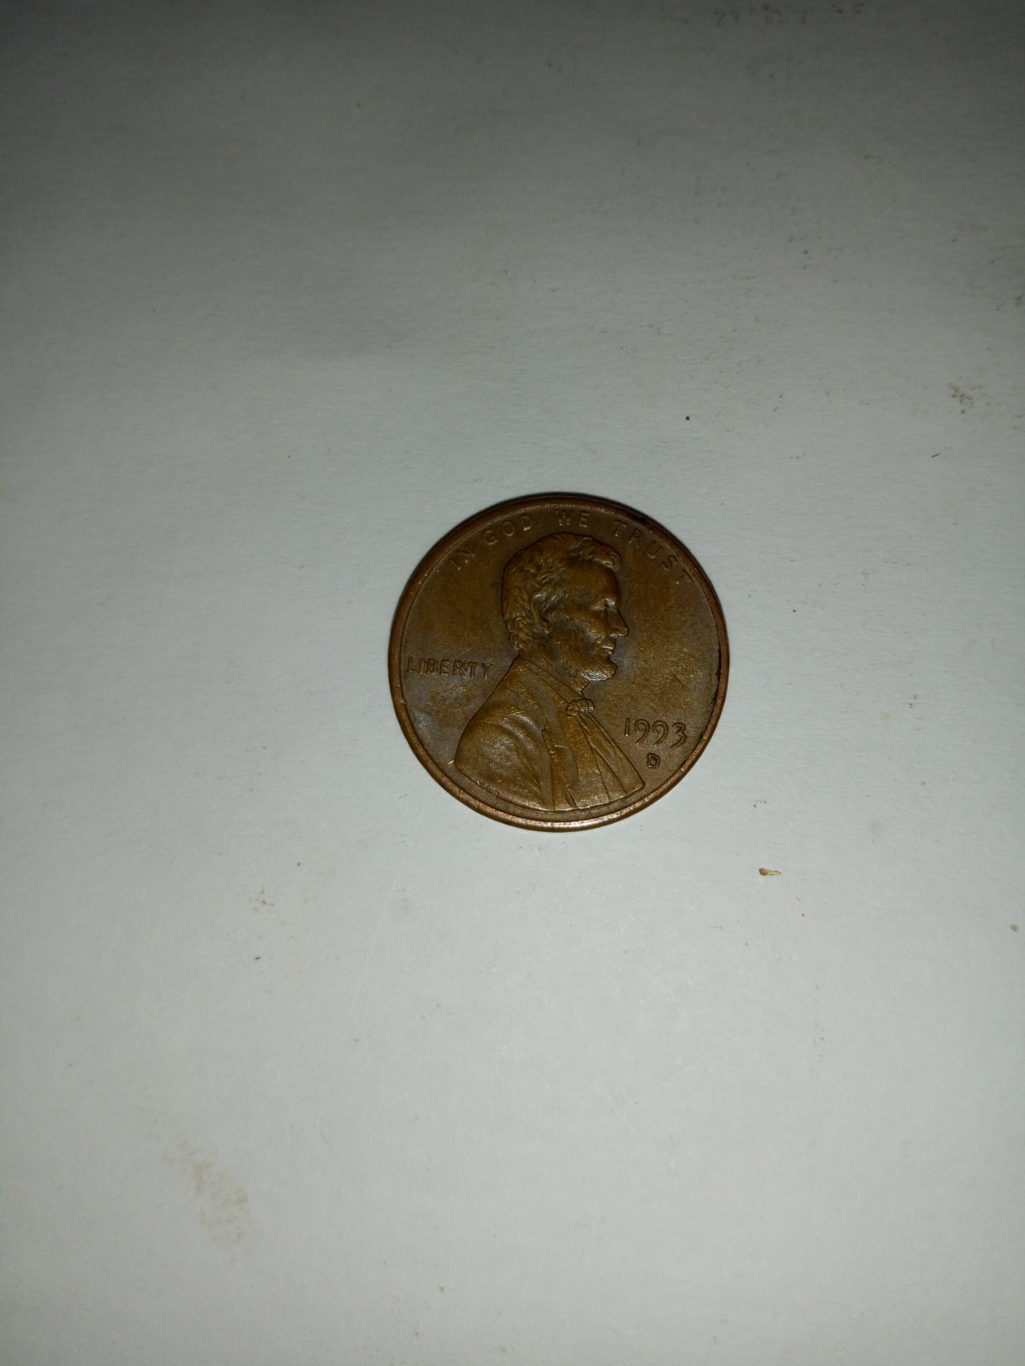 1993_united States of america 1 cent